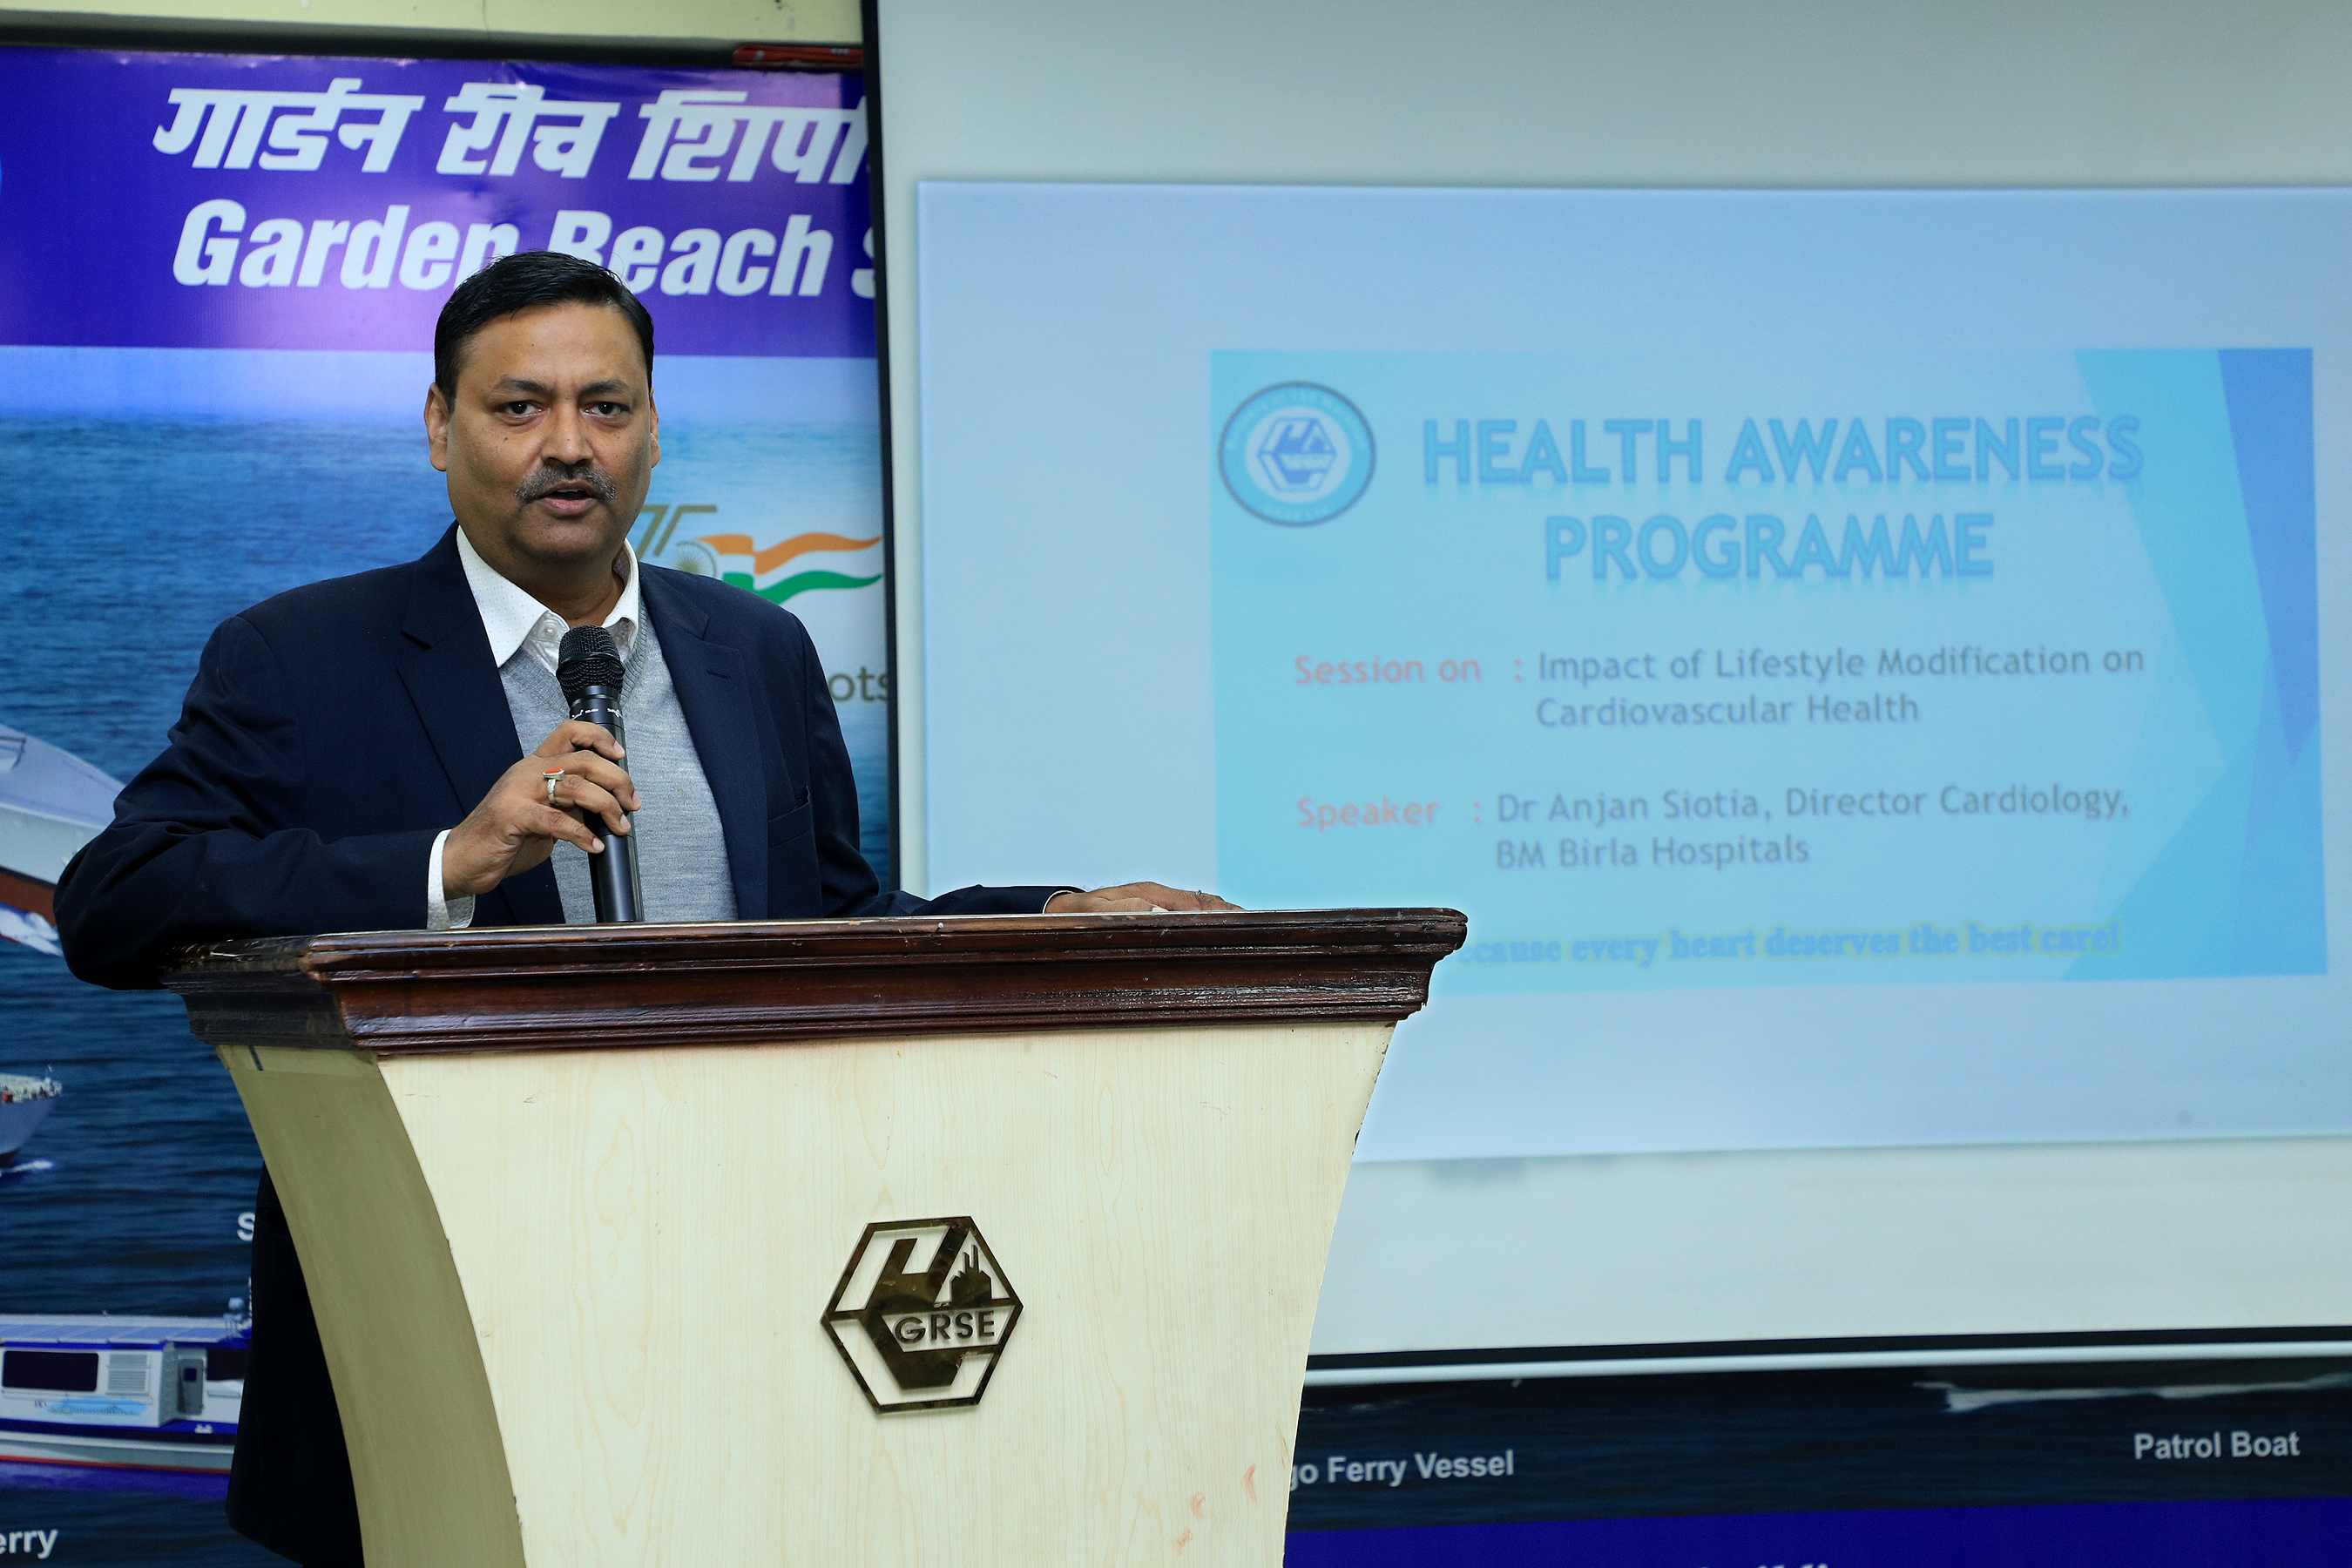 Awareness Session on 'Impact of Lifestyle Modification on Cardiovascular Health' by DR. Anjan Siotia, DIR (Cardiology), BM Birla Hospitals at Main Works Unit on 17 Jan 24